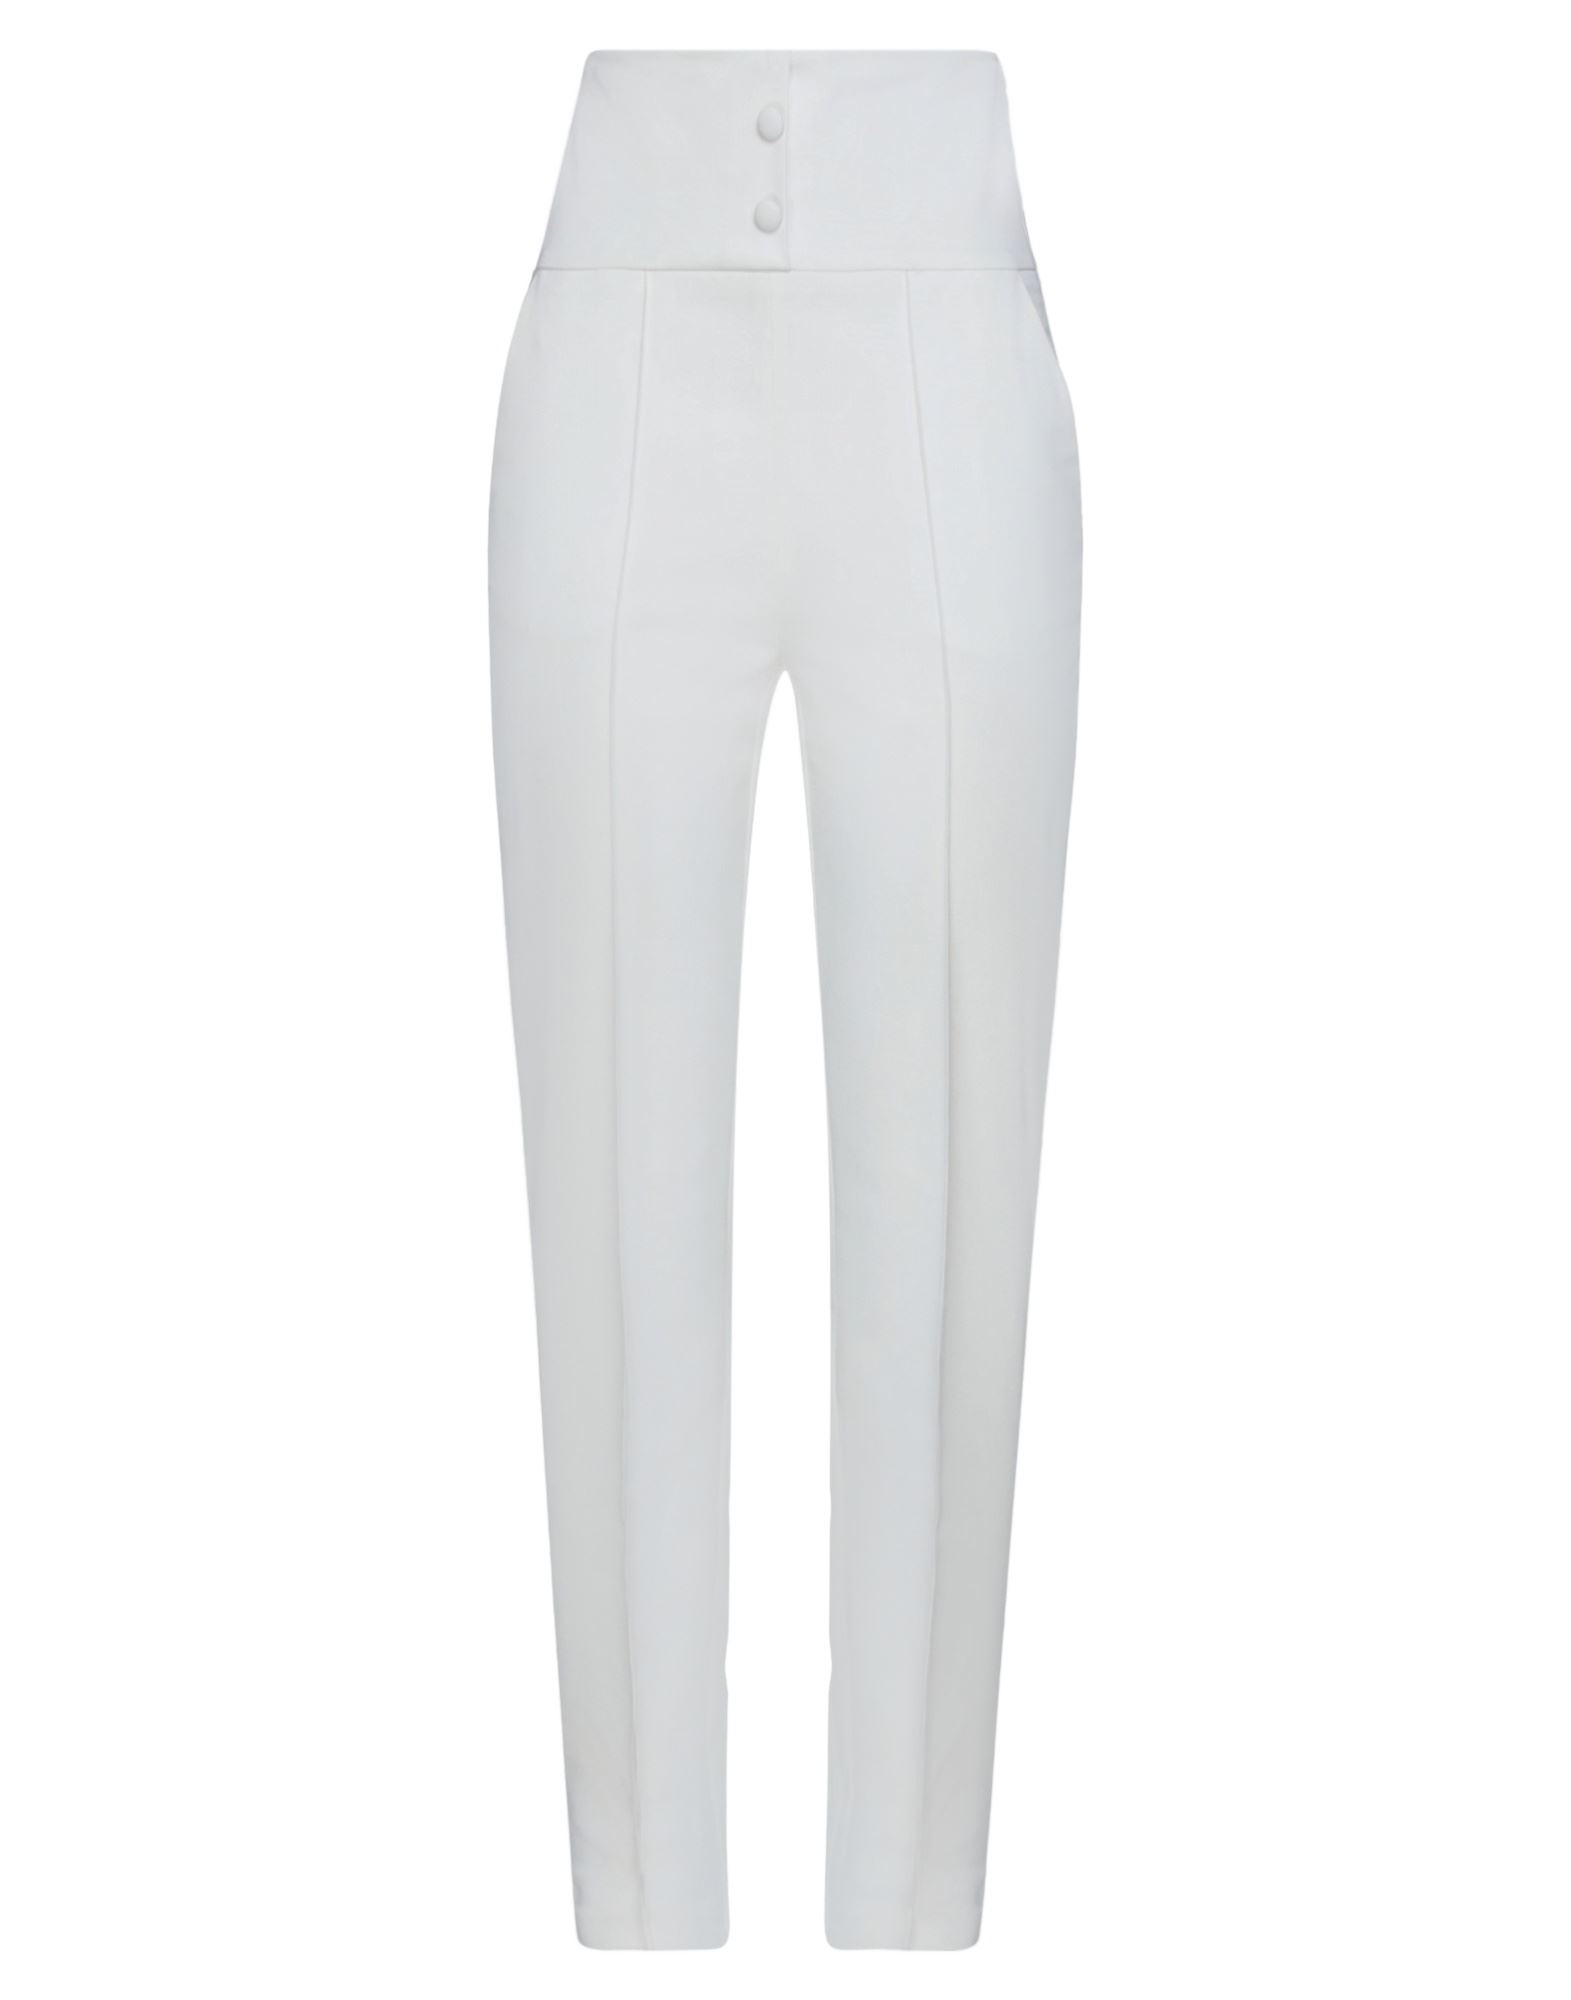 Actualee Pants In White